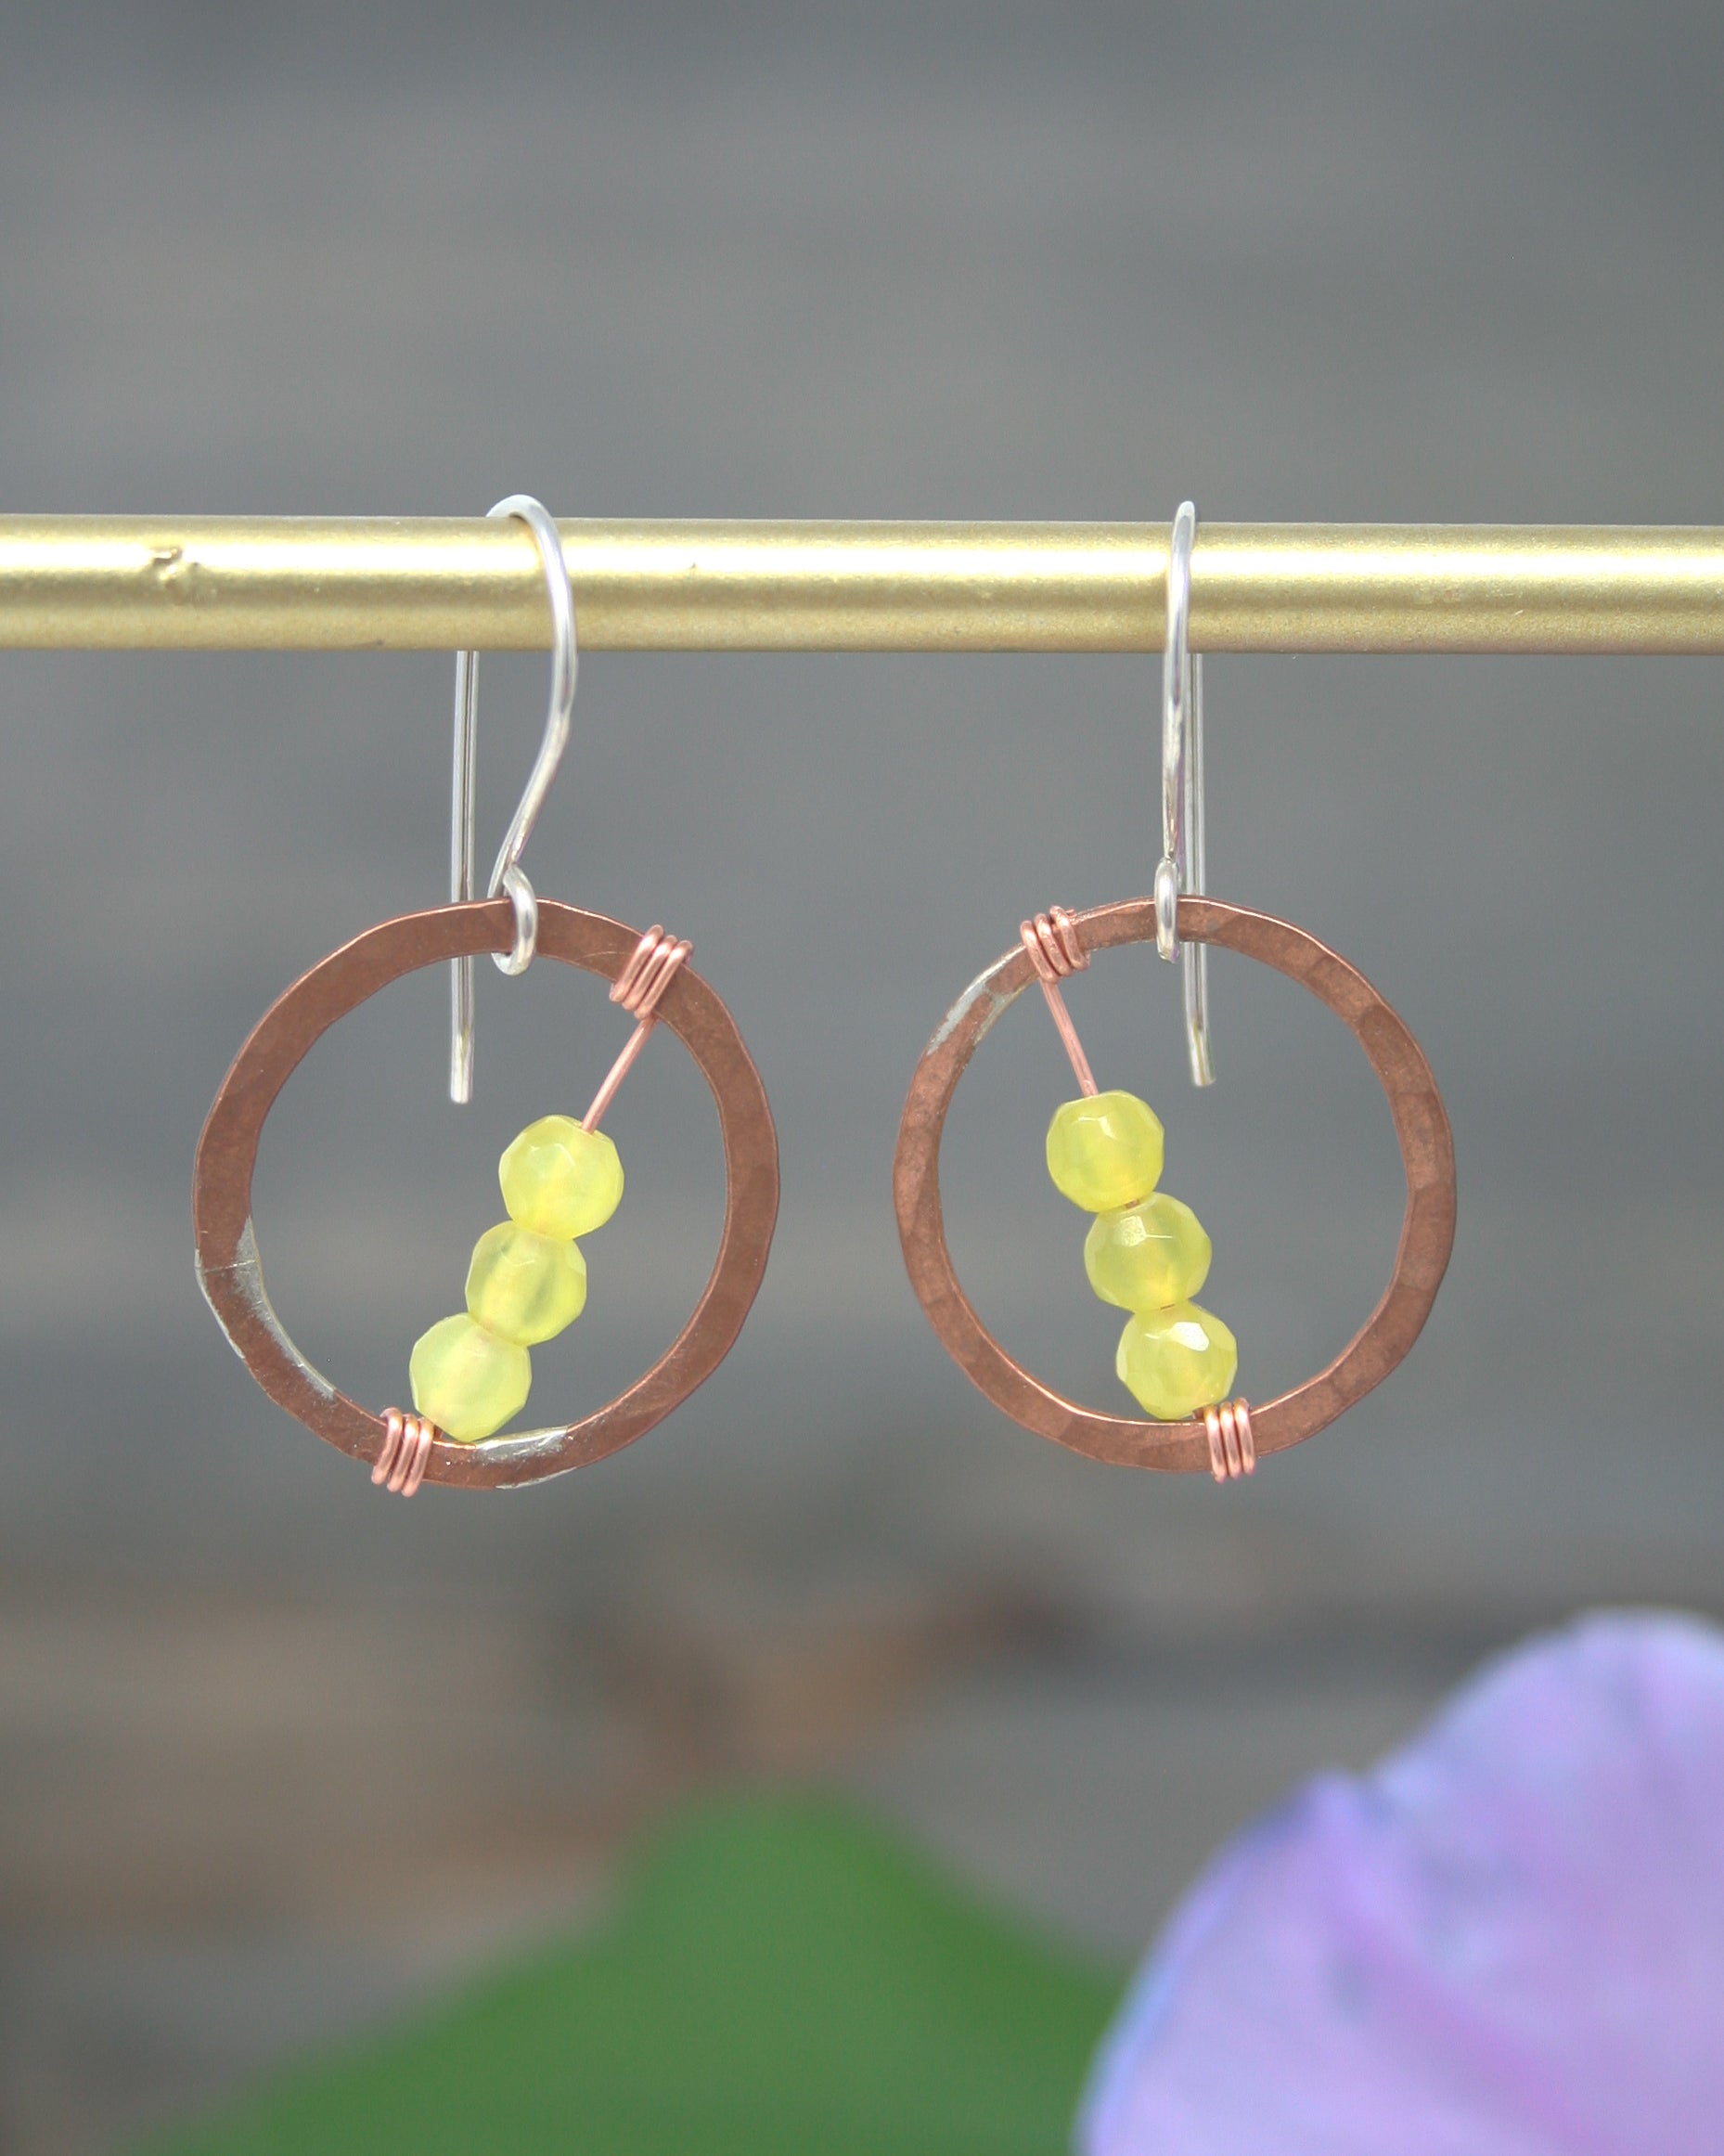 a pair of earrings hanging from a metal rod